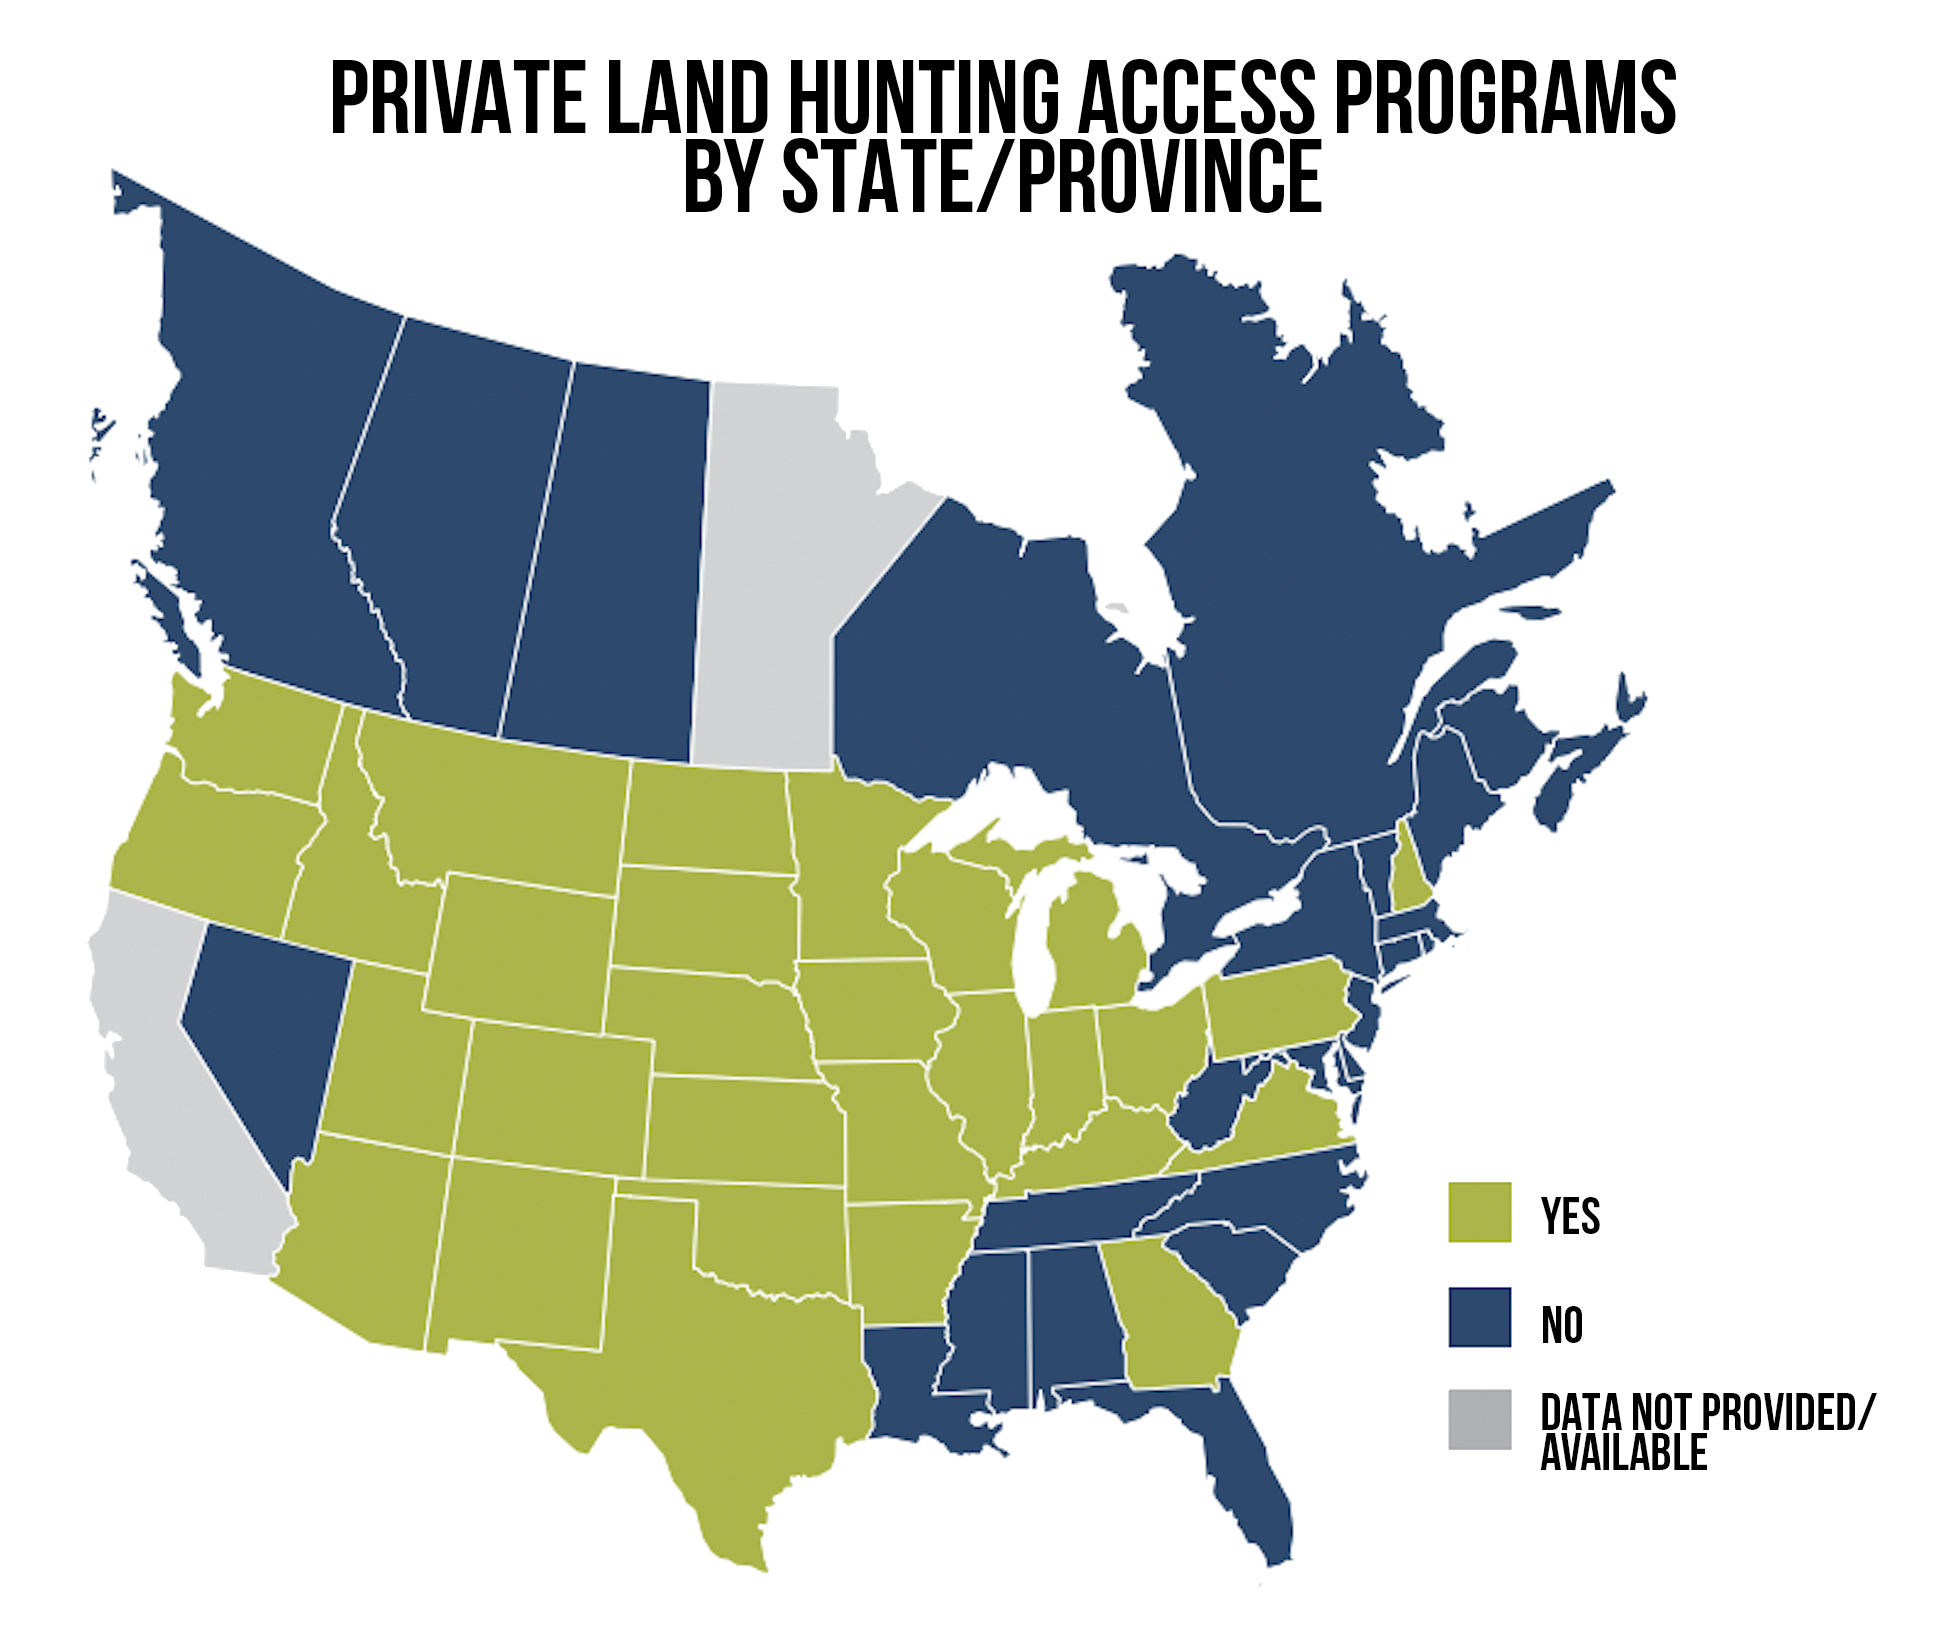 Private land hunting access programs in the U.S.